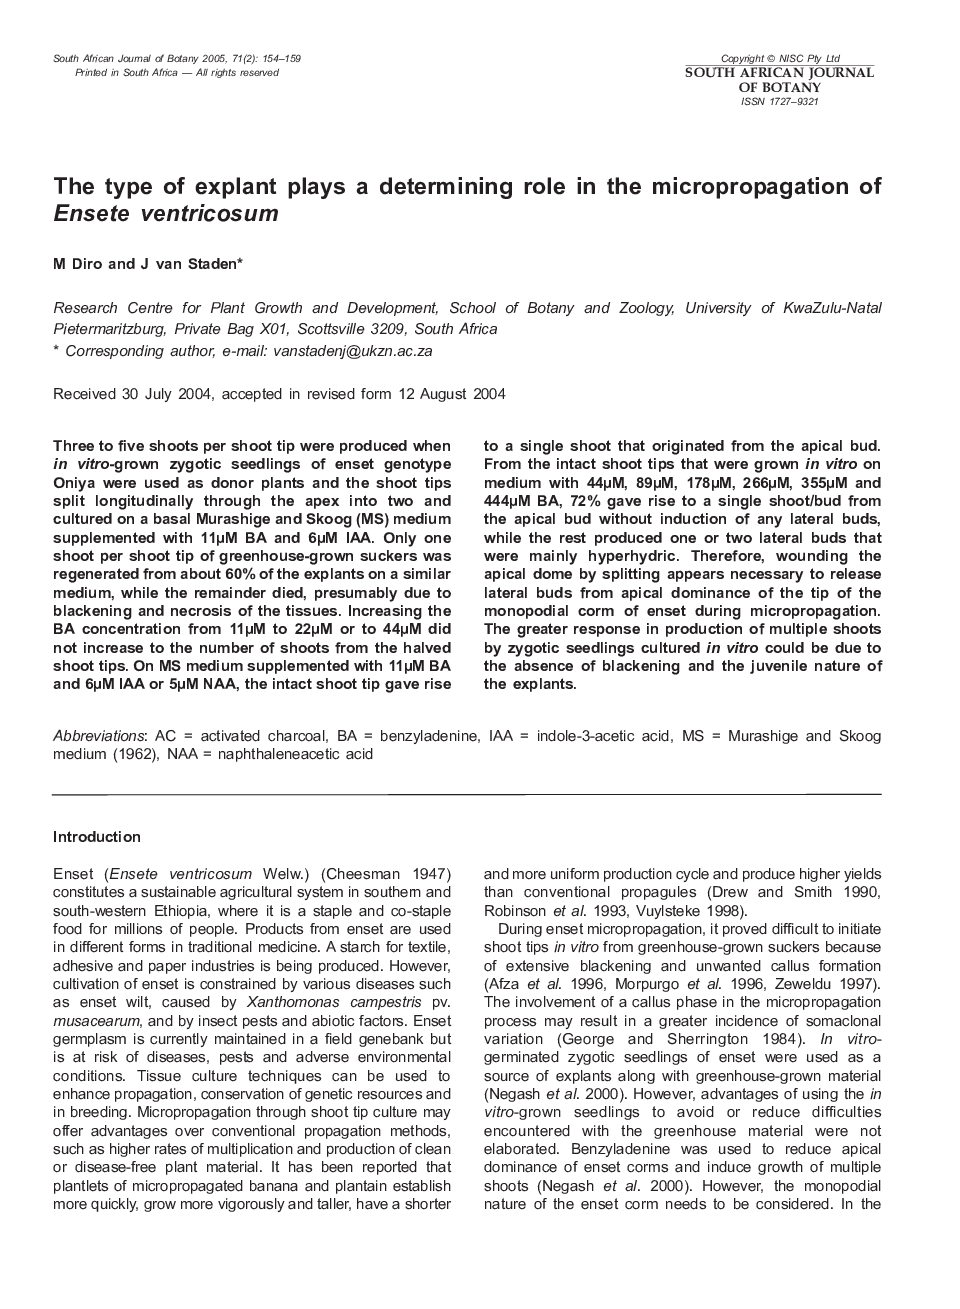 The type of explant plays a determining role in the micropropagation of Ensete ventricosum